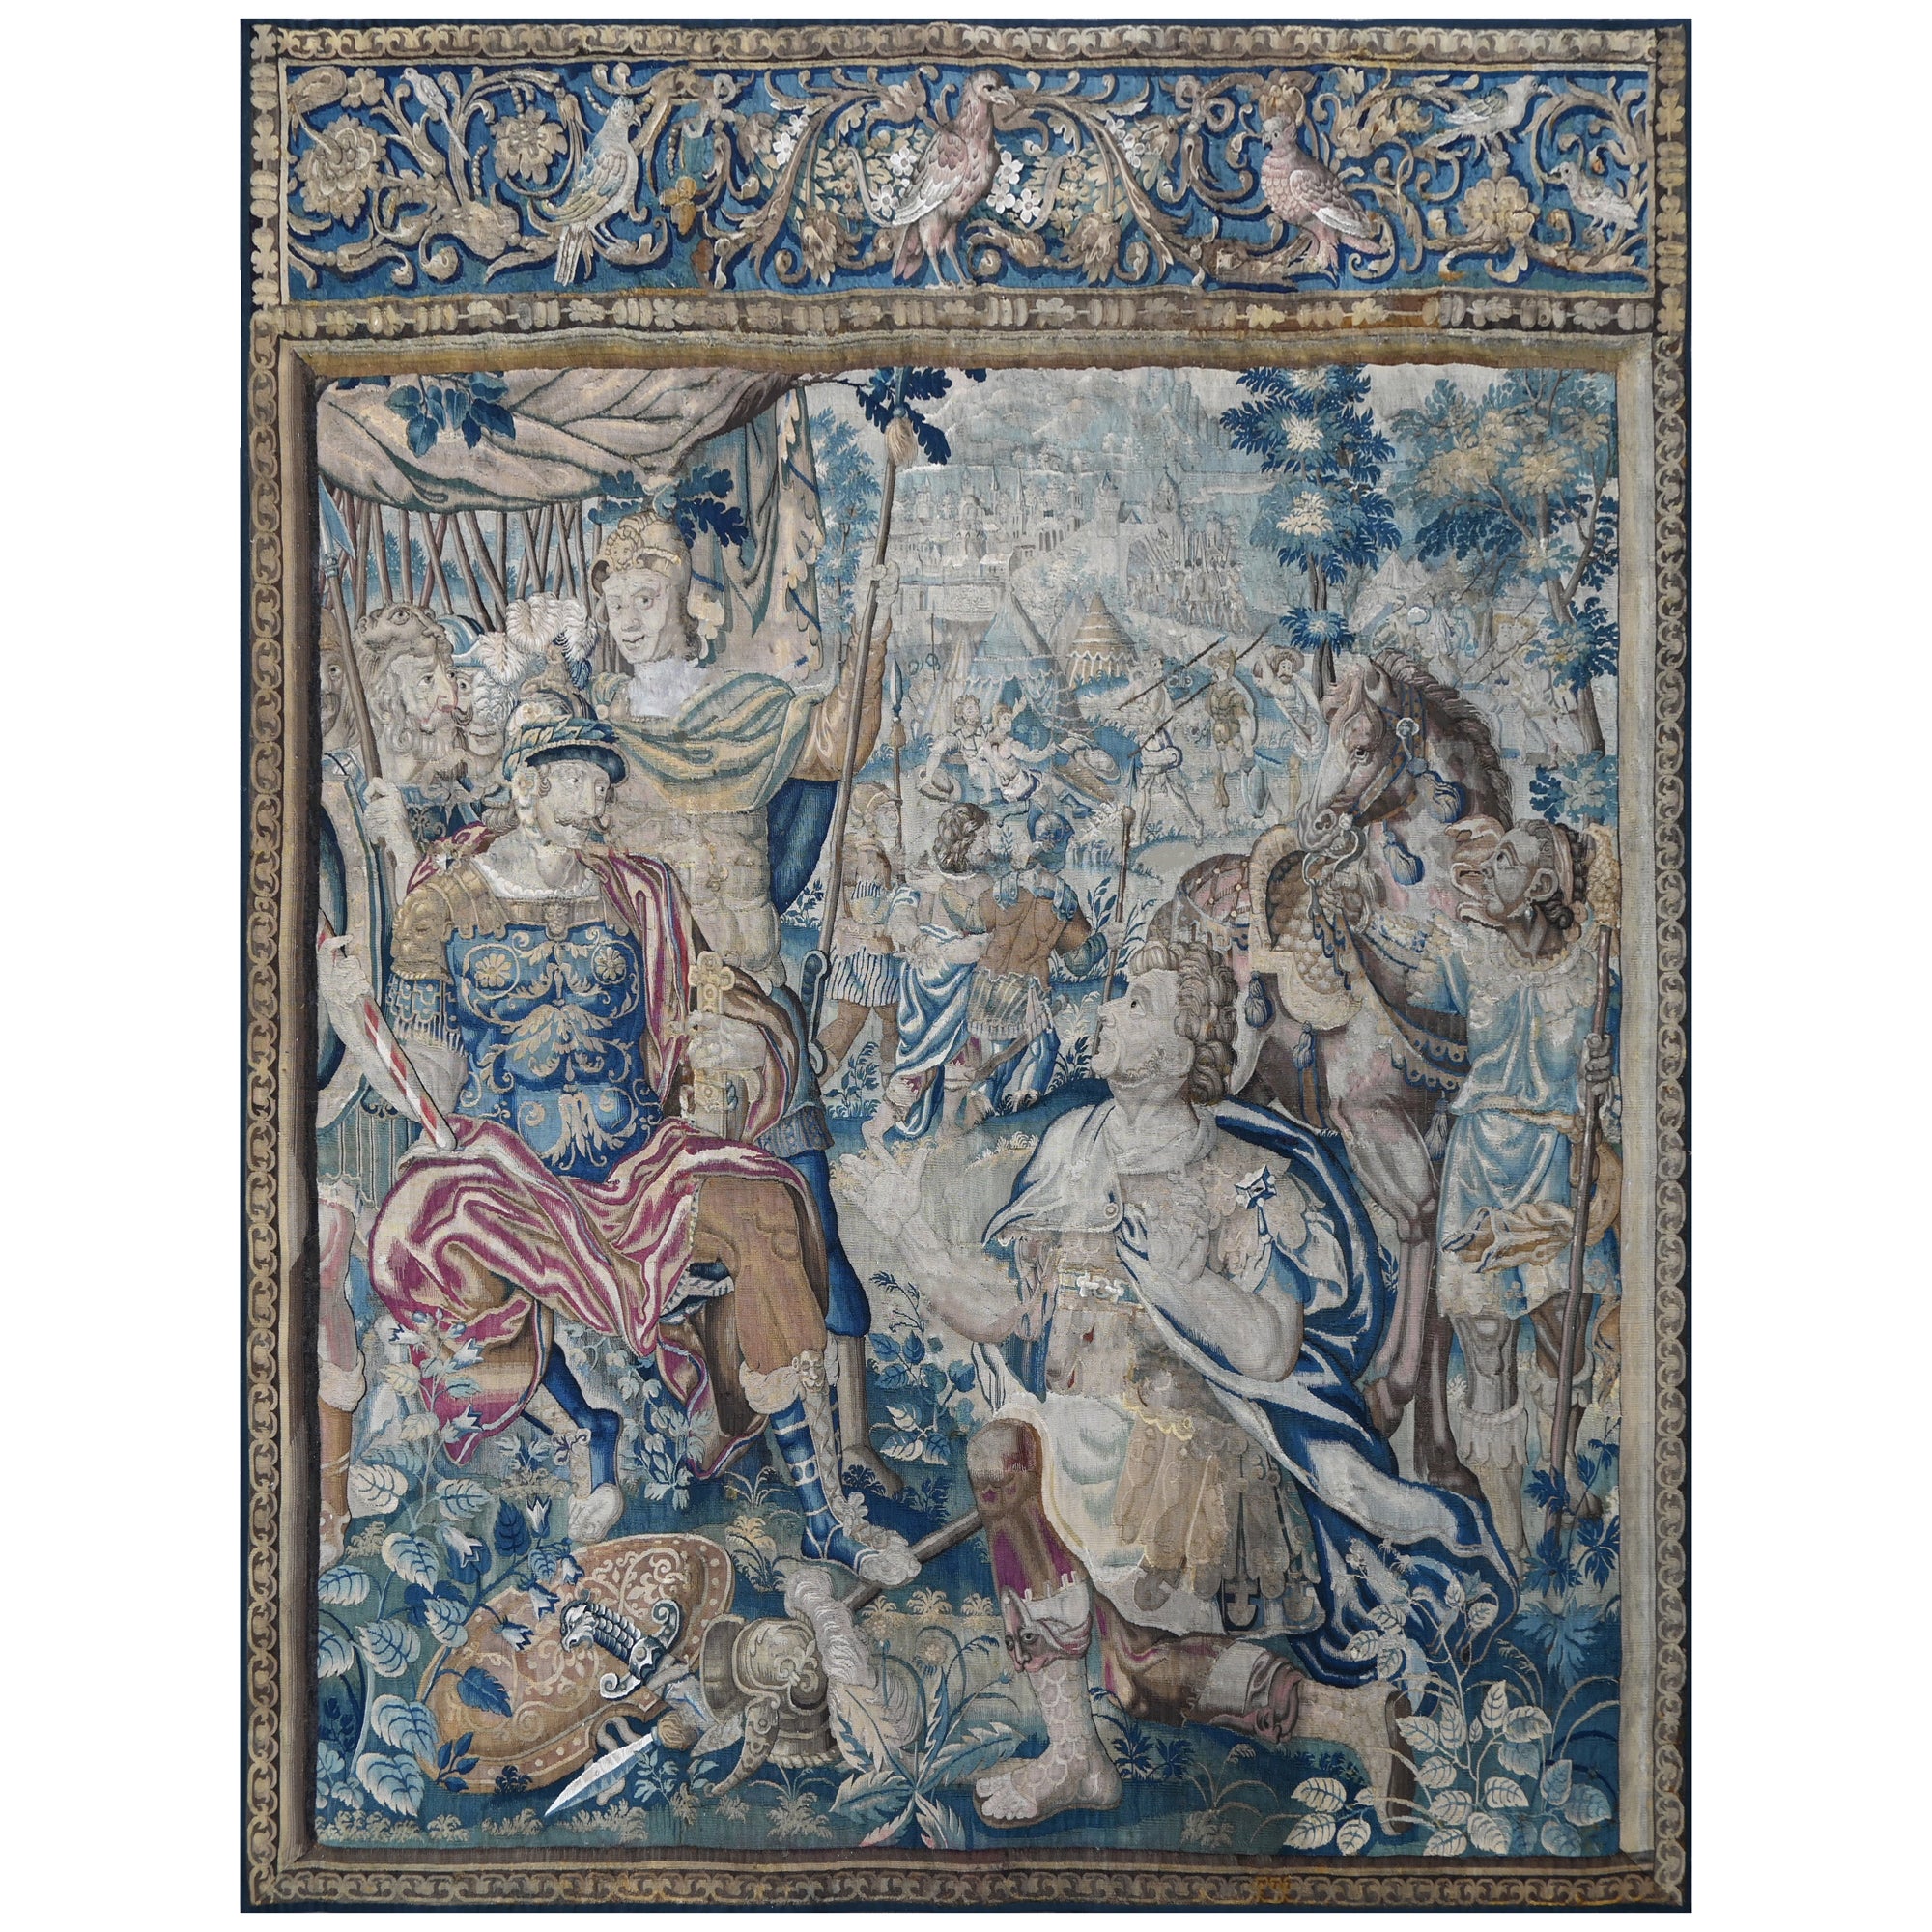 Tapestry Manufacture Brussels, Mid 17th - The Capture Of Rome 410 Ad - No. 1375